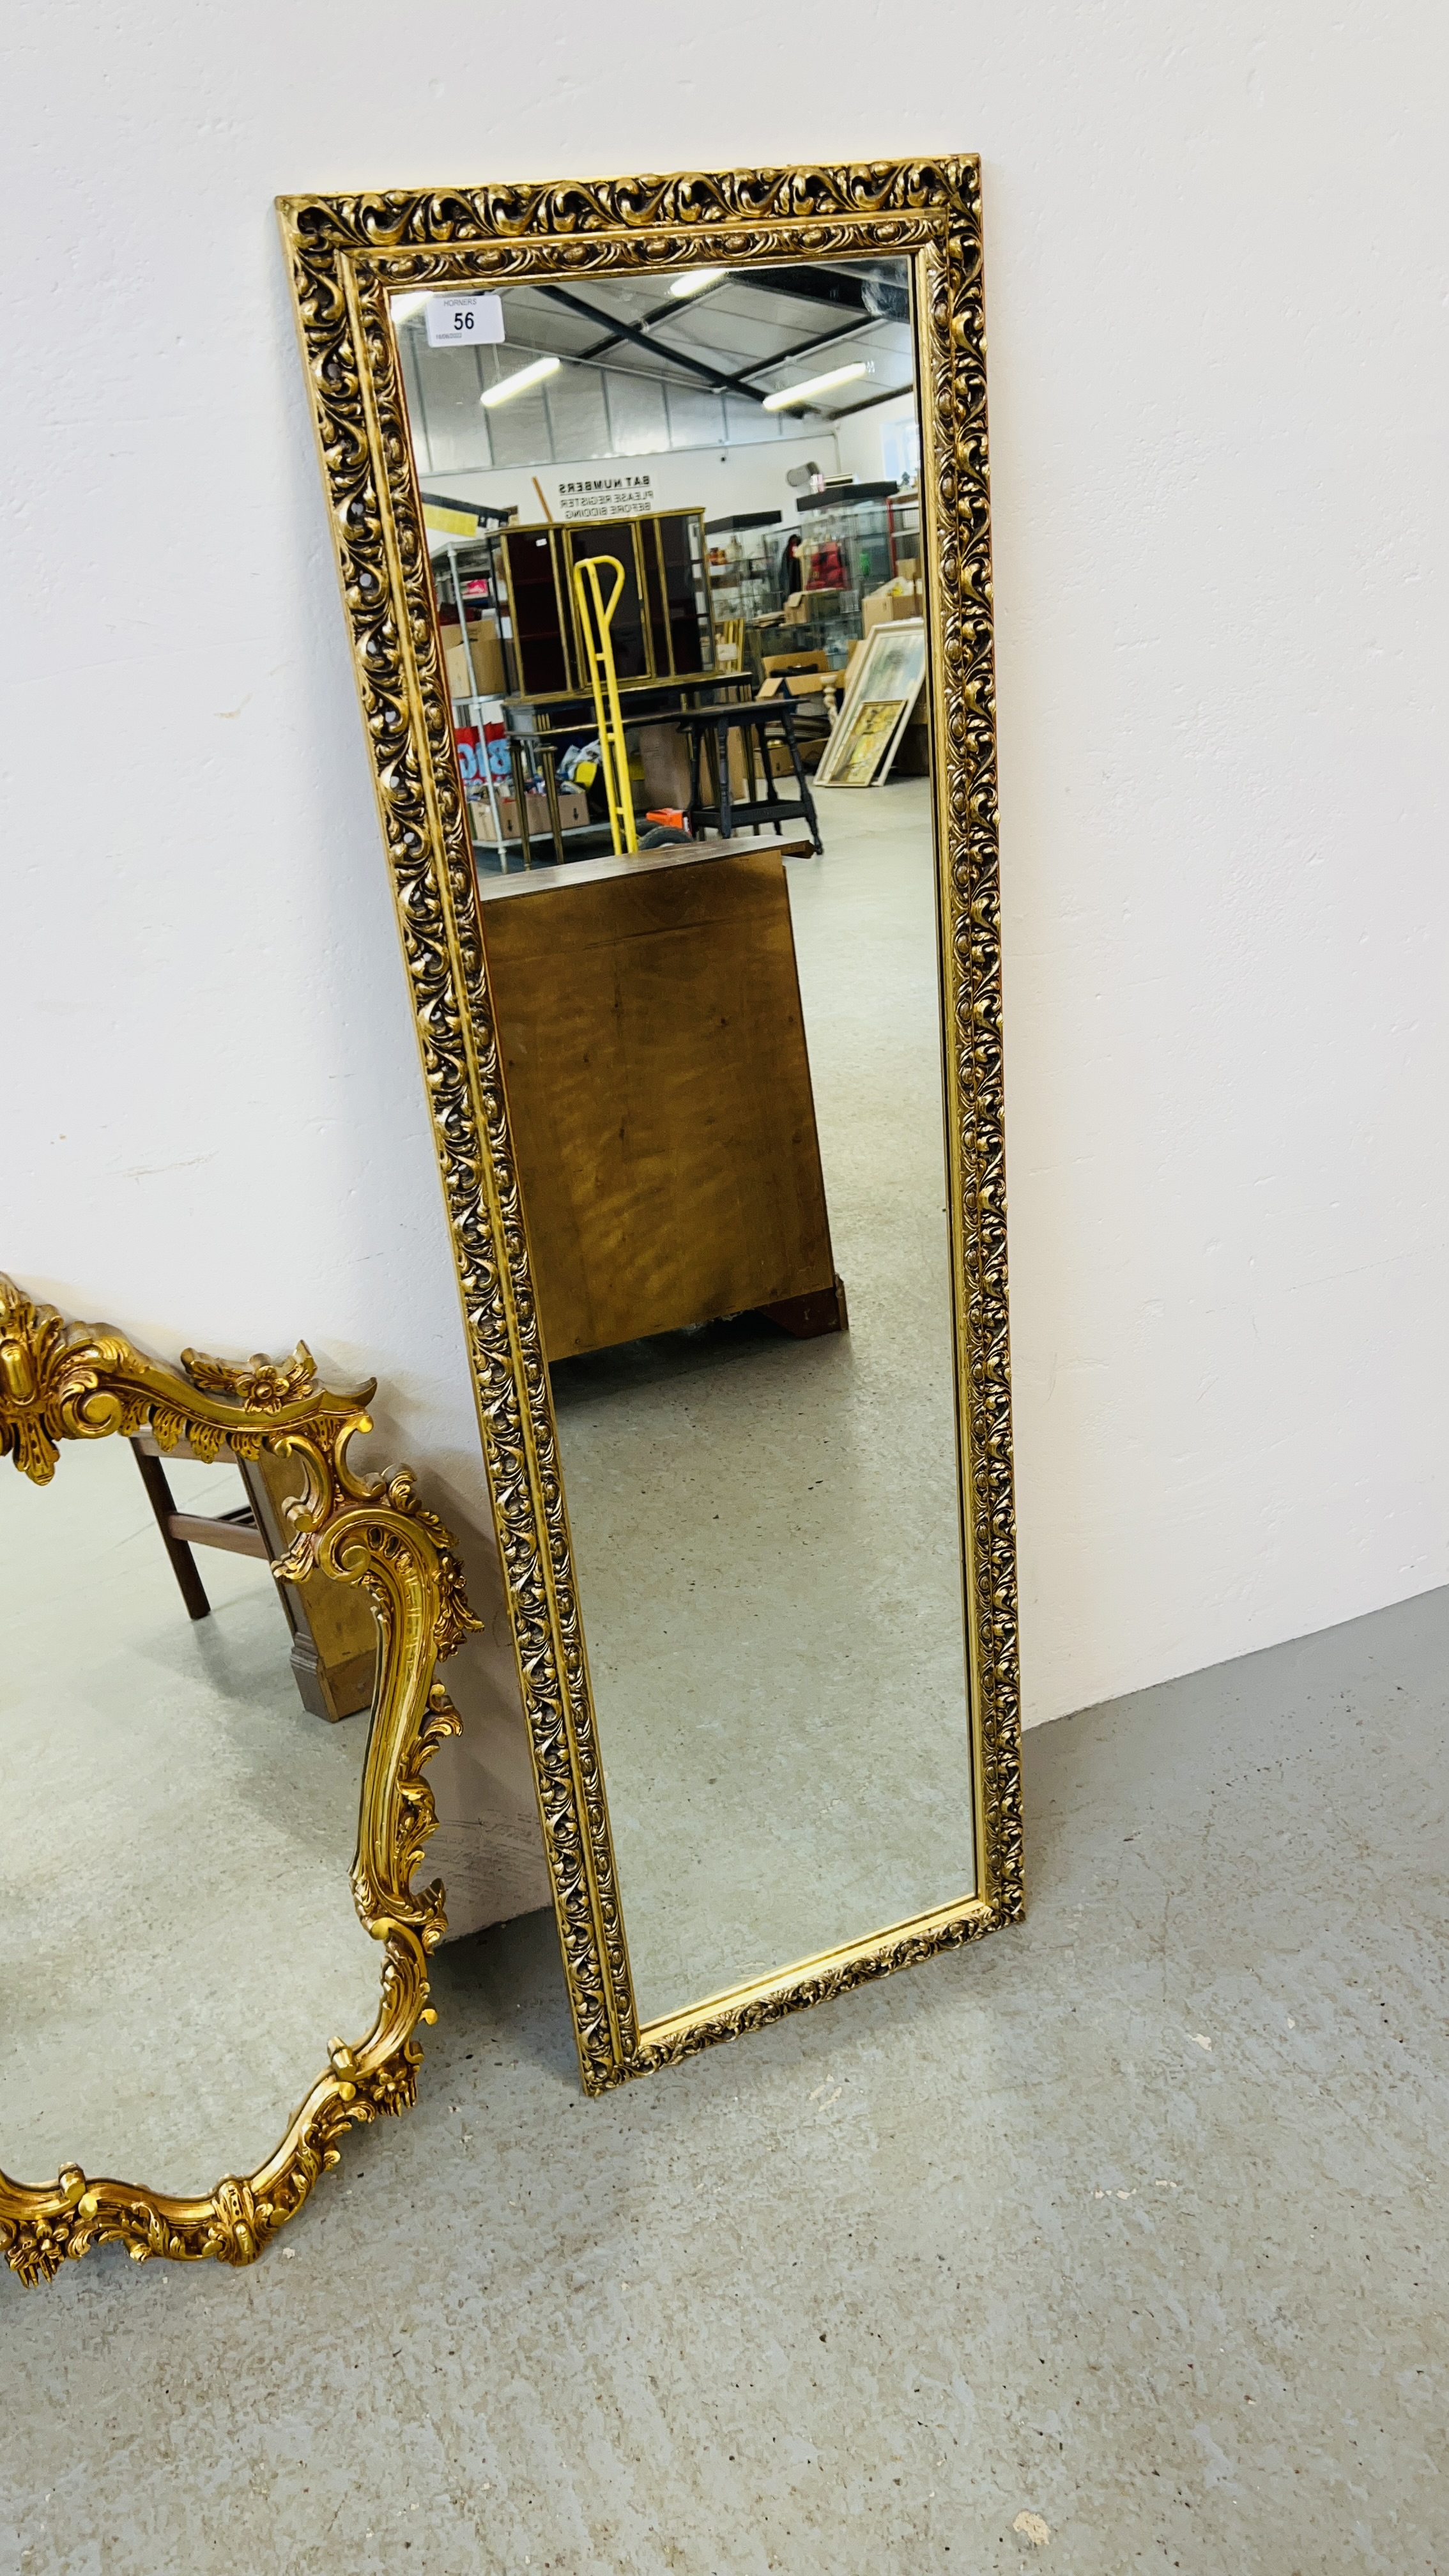 FOUR ORNATE GILT FRAMED DECORATIVE WALL MIRRORS OF VARIOUS DESIGNS - Image 5 of 6